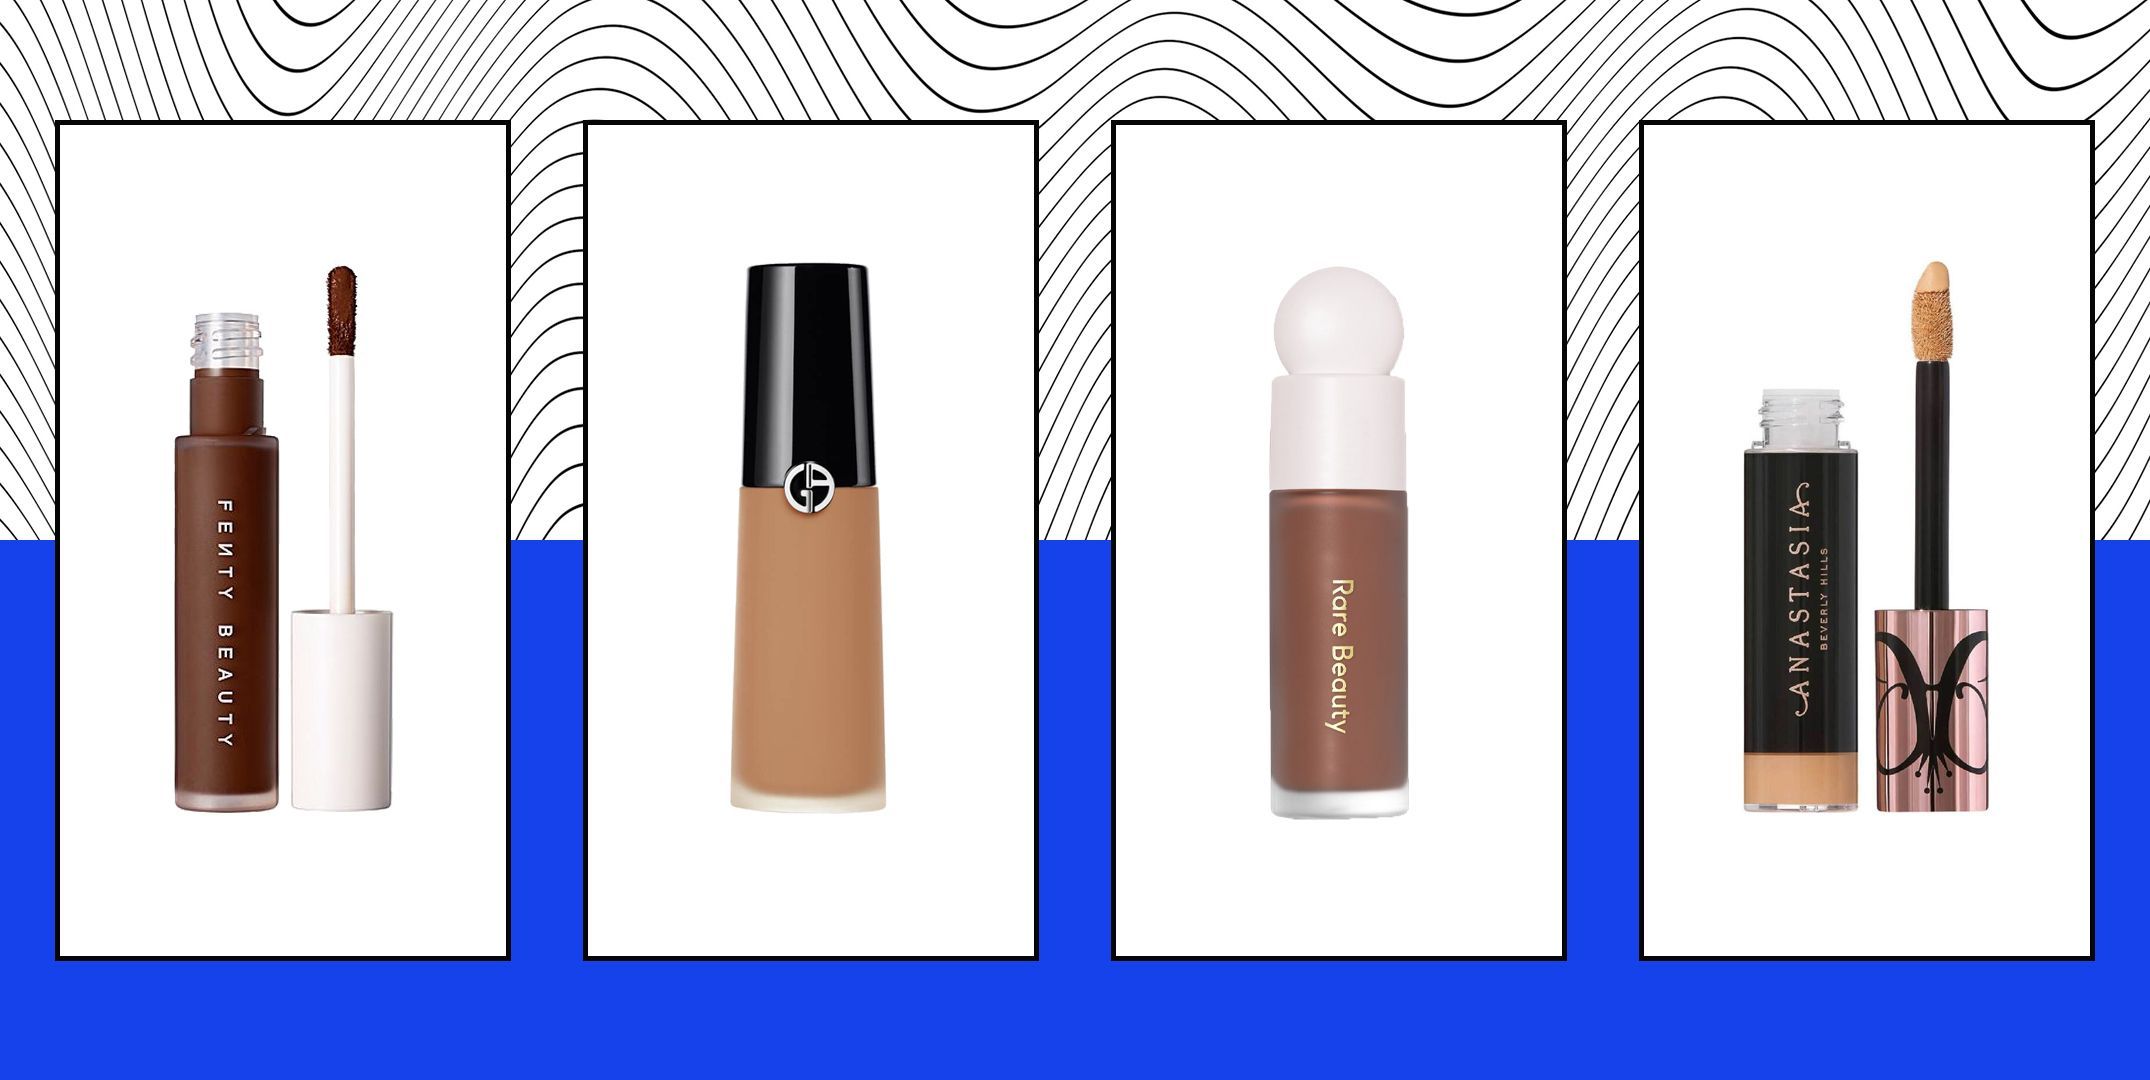 How to Apply Foundation For the Most Even, Blended Finish